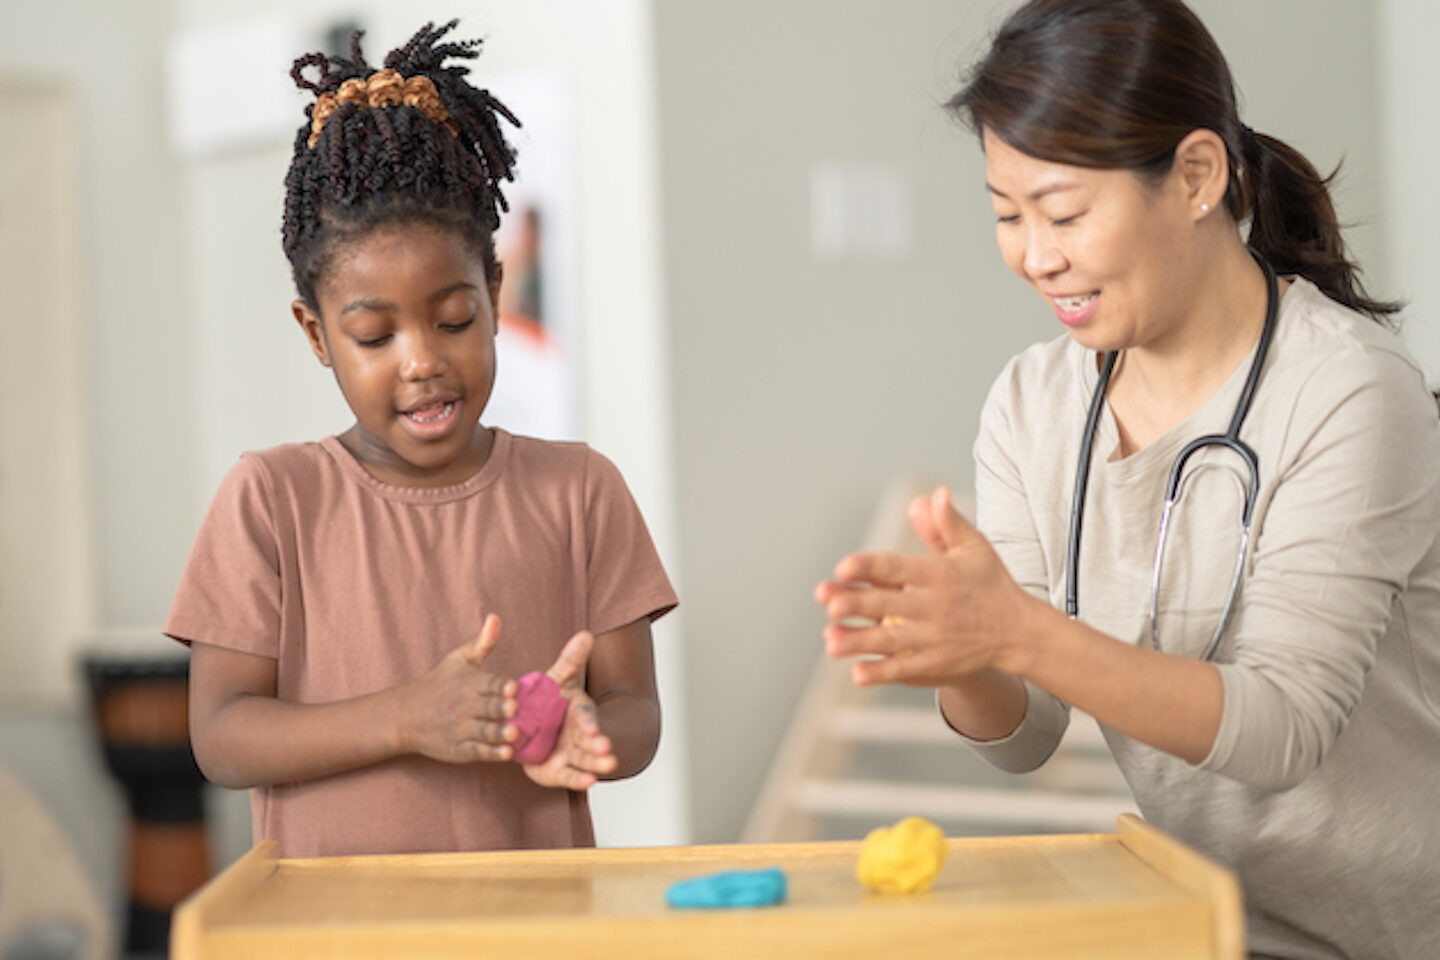 Female doctor playing with play dough with a young girl